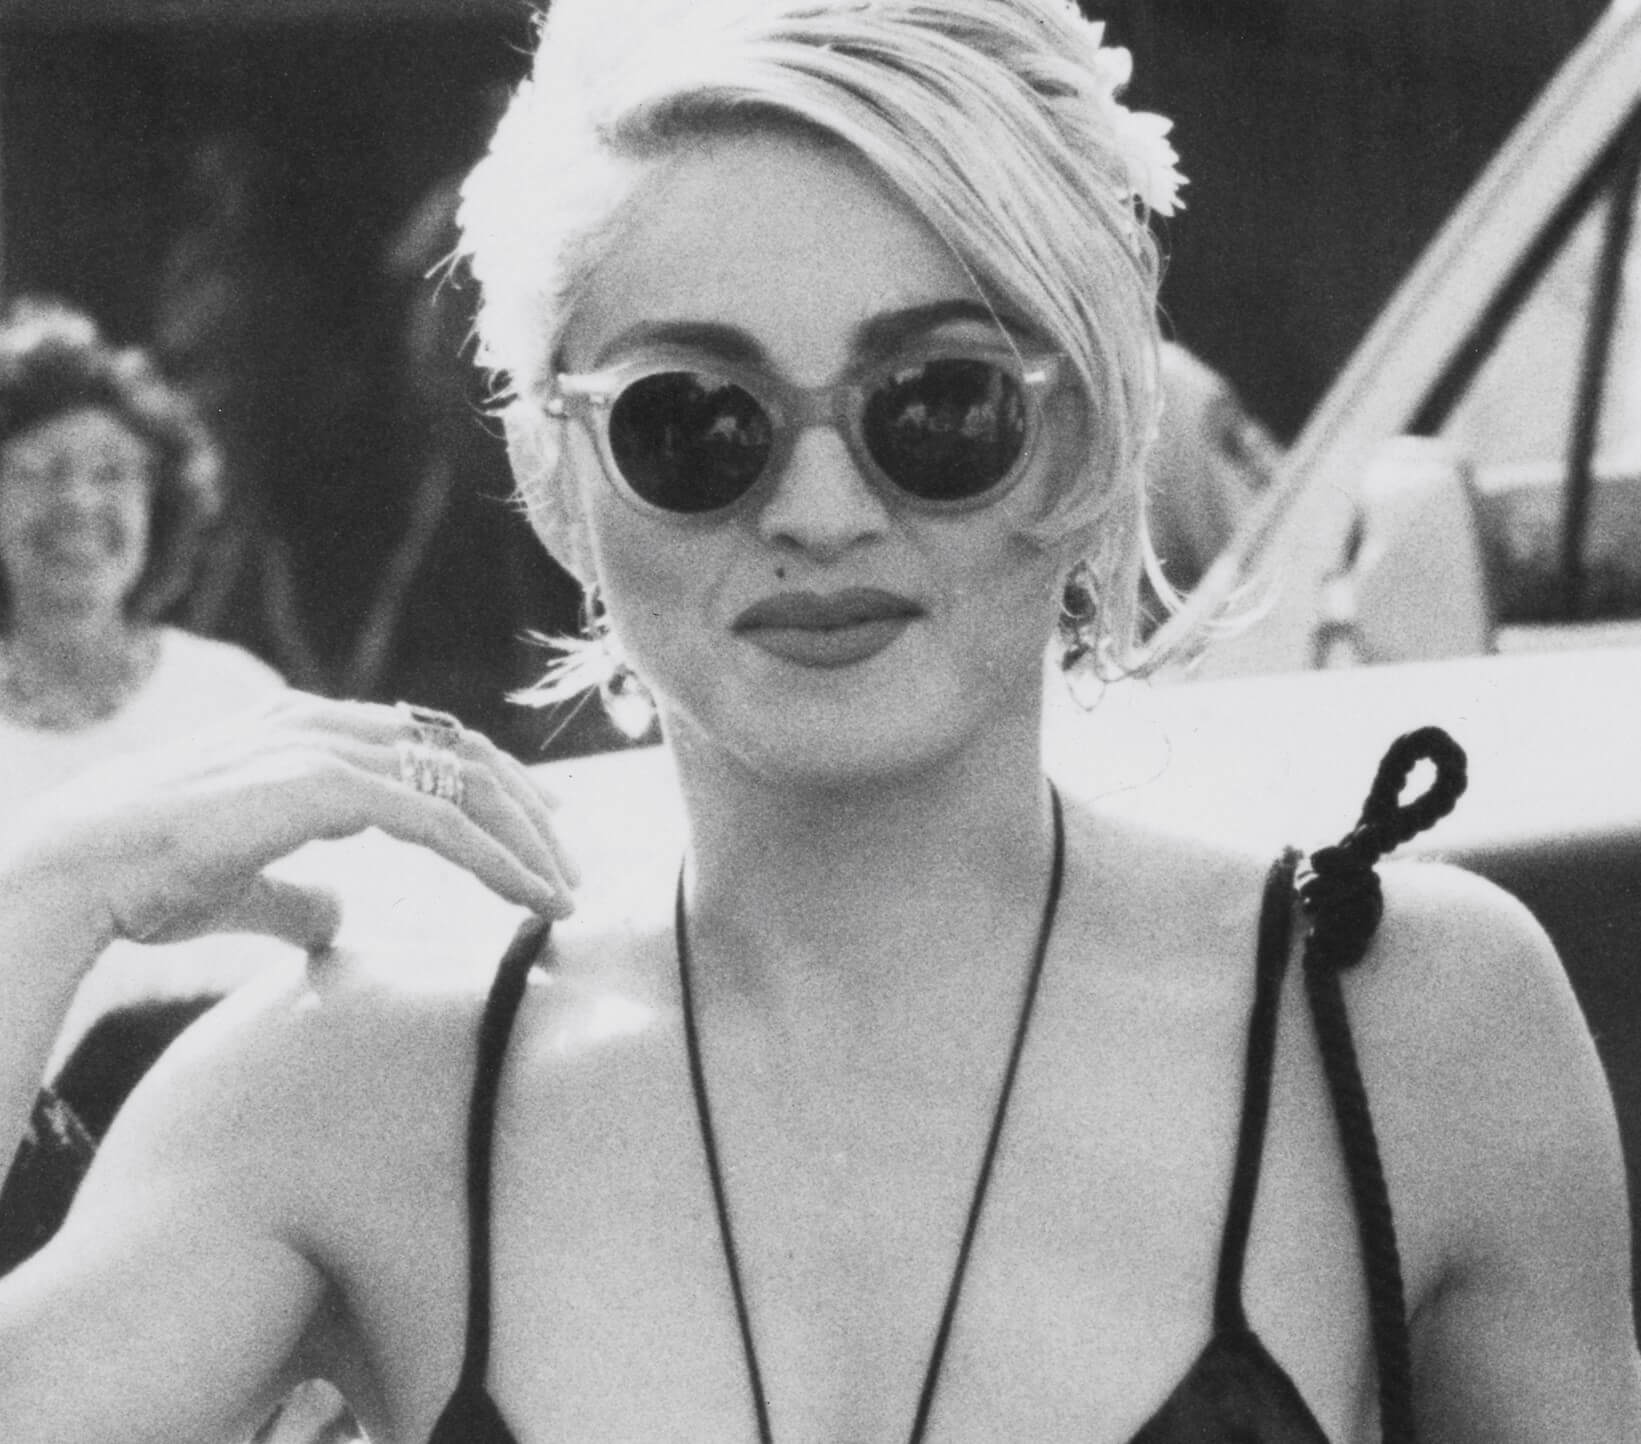 'A League of Their Own' star Madonna wearing sunglasses